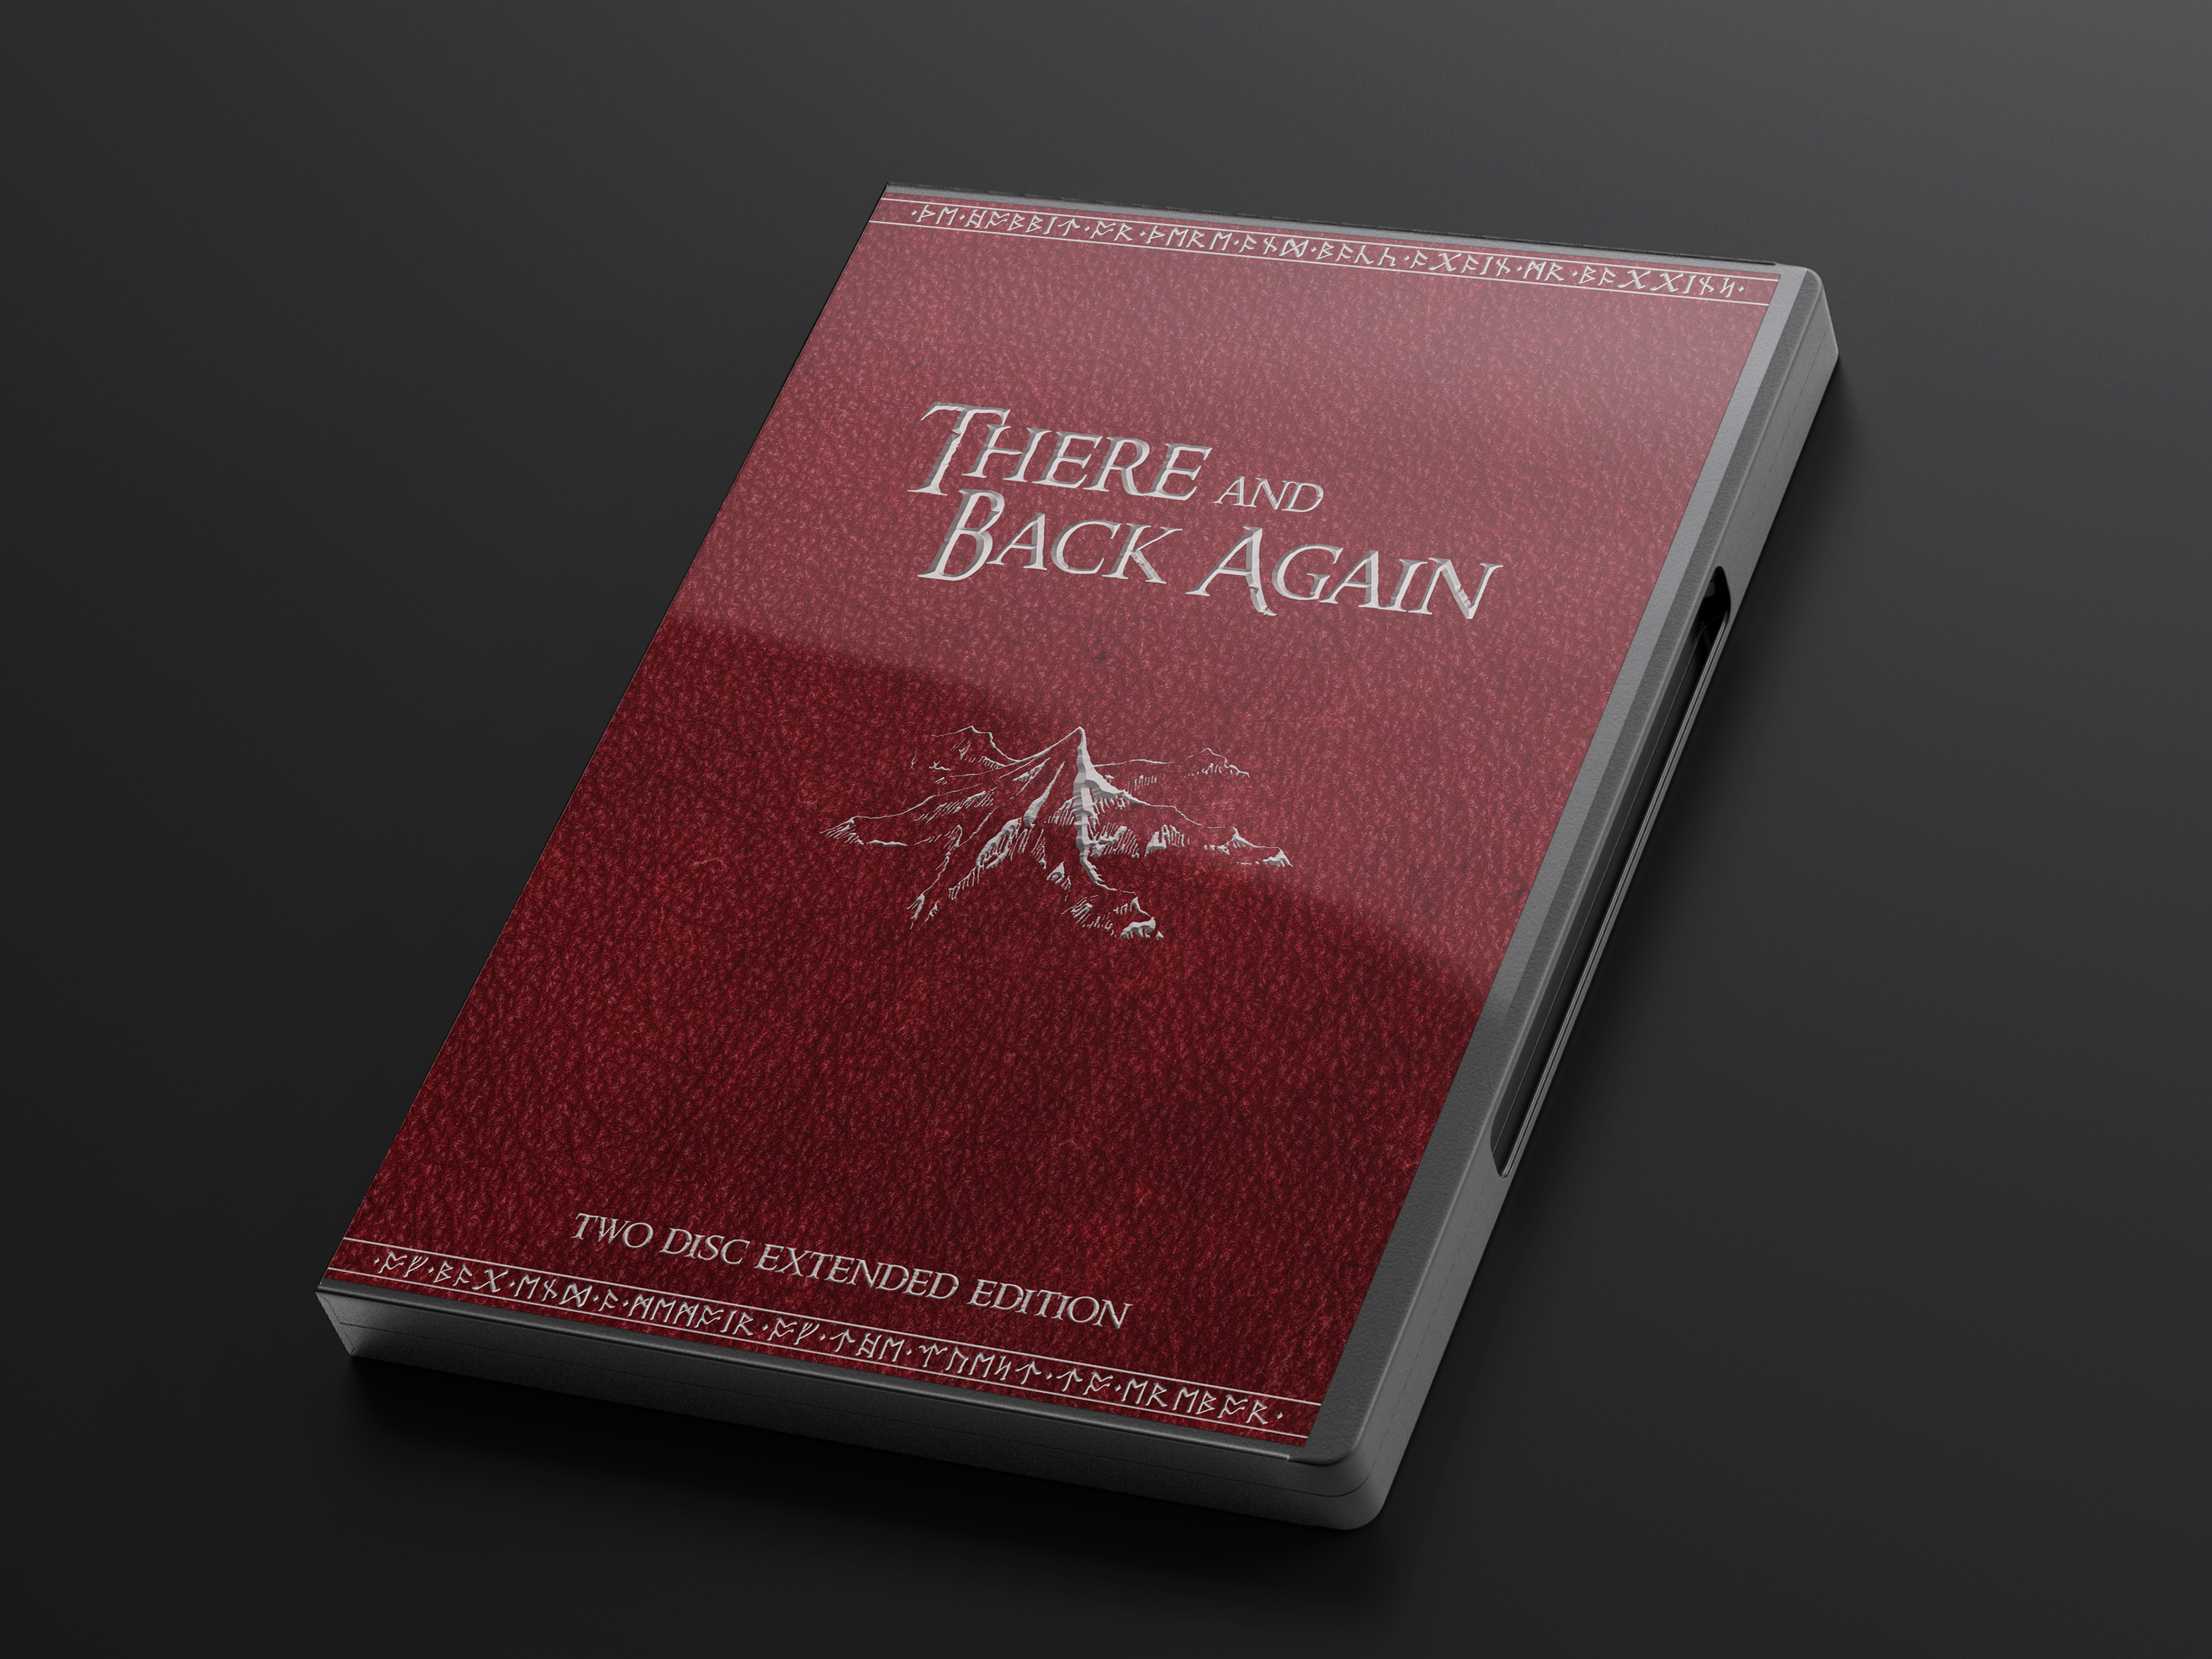 There and Back Again DVD Photo